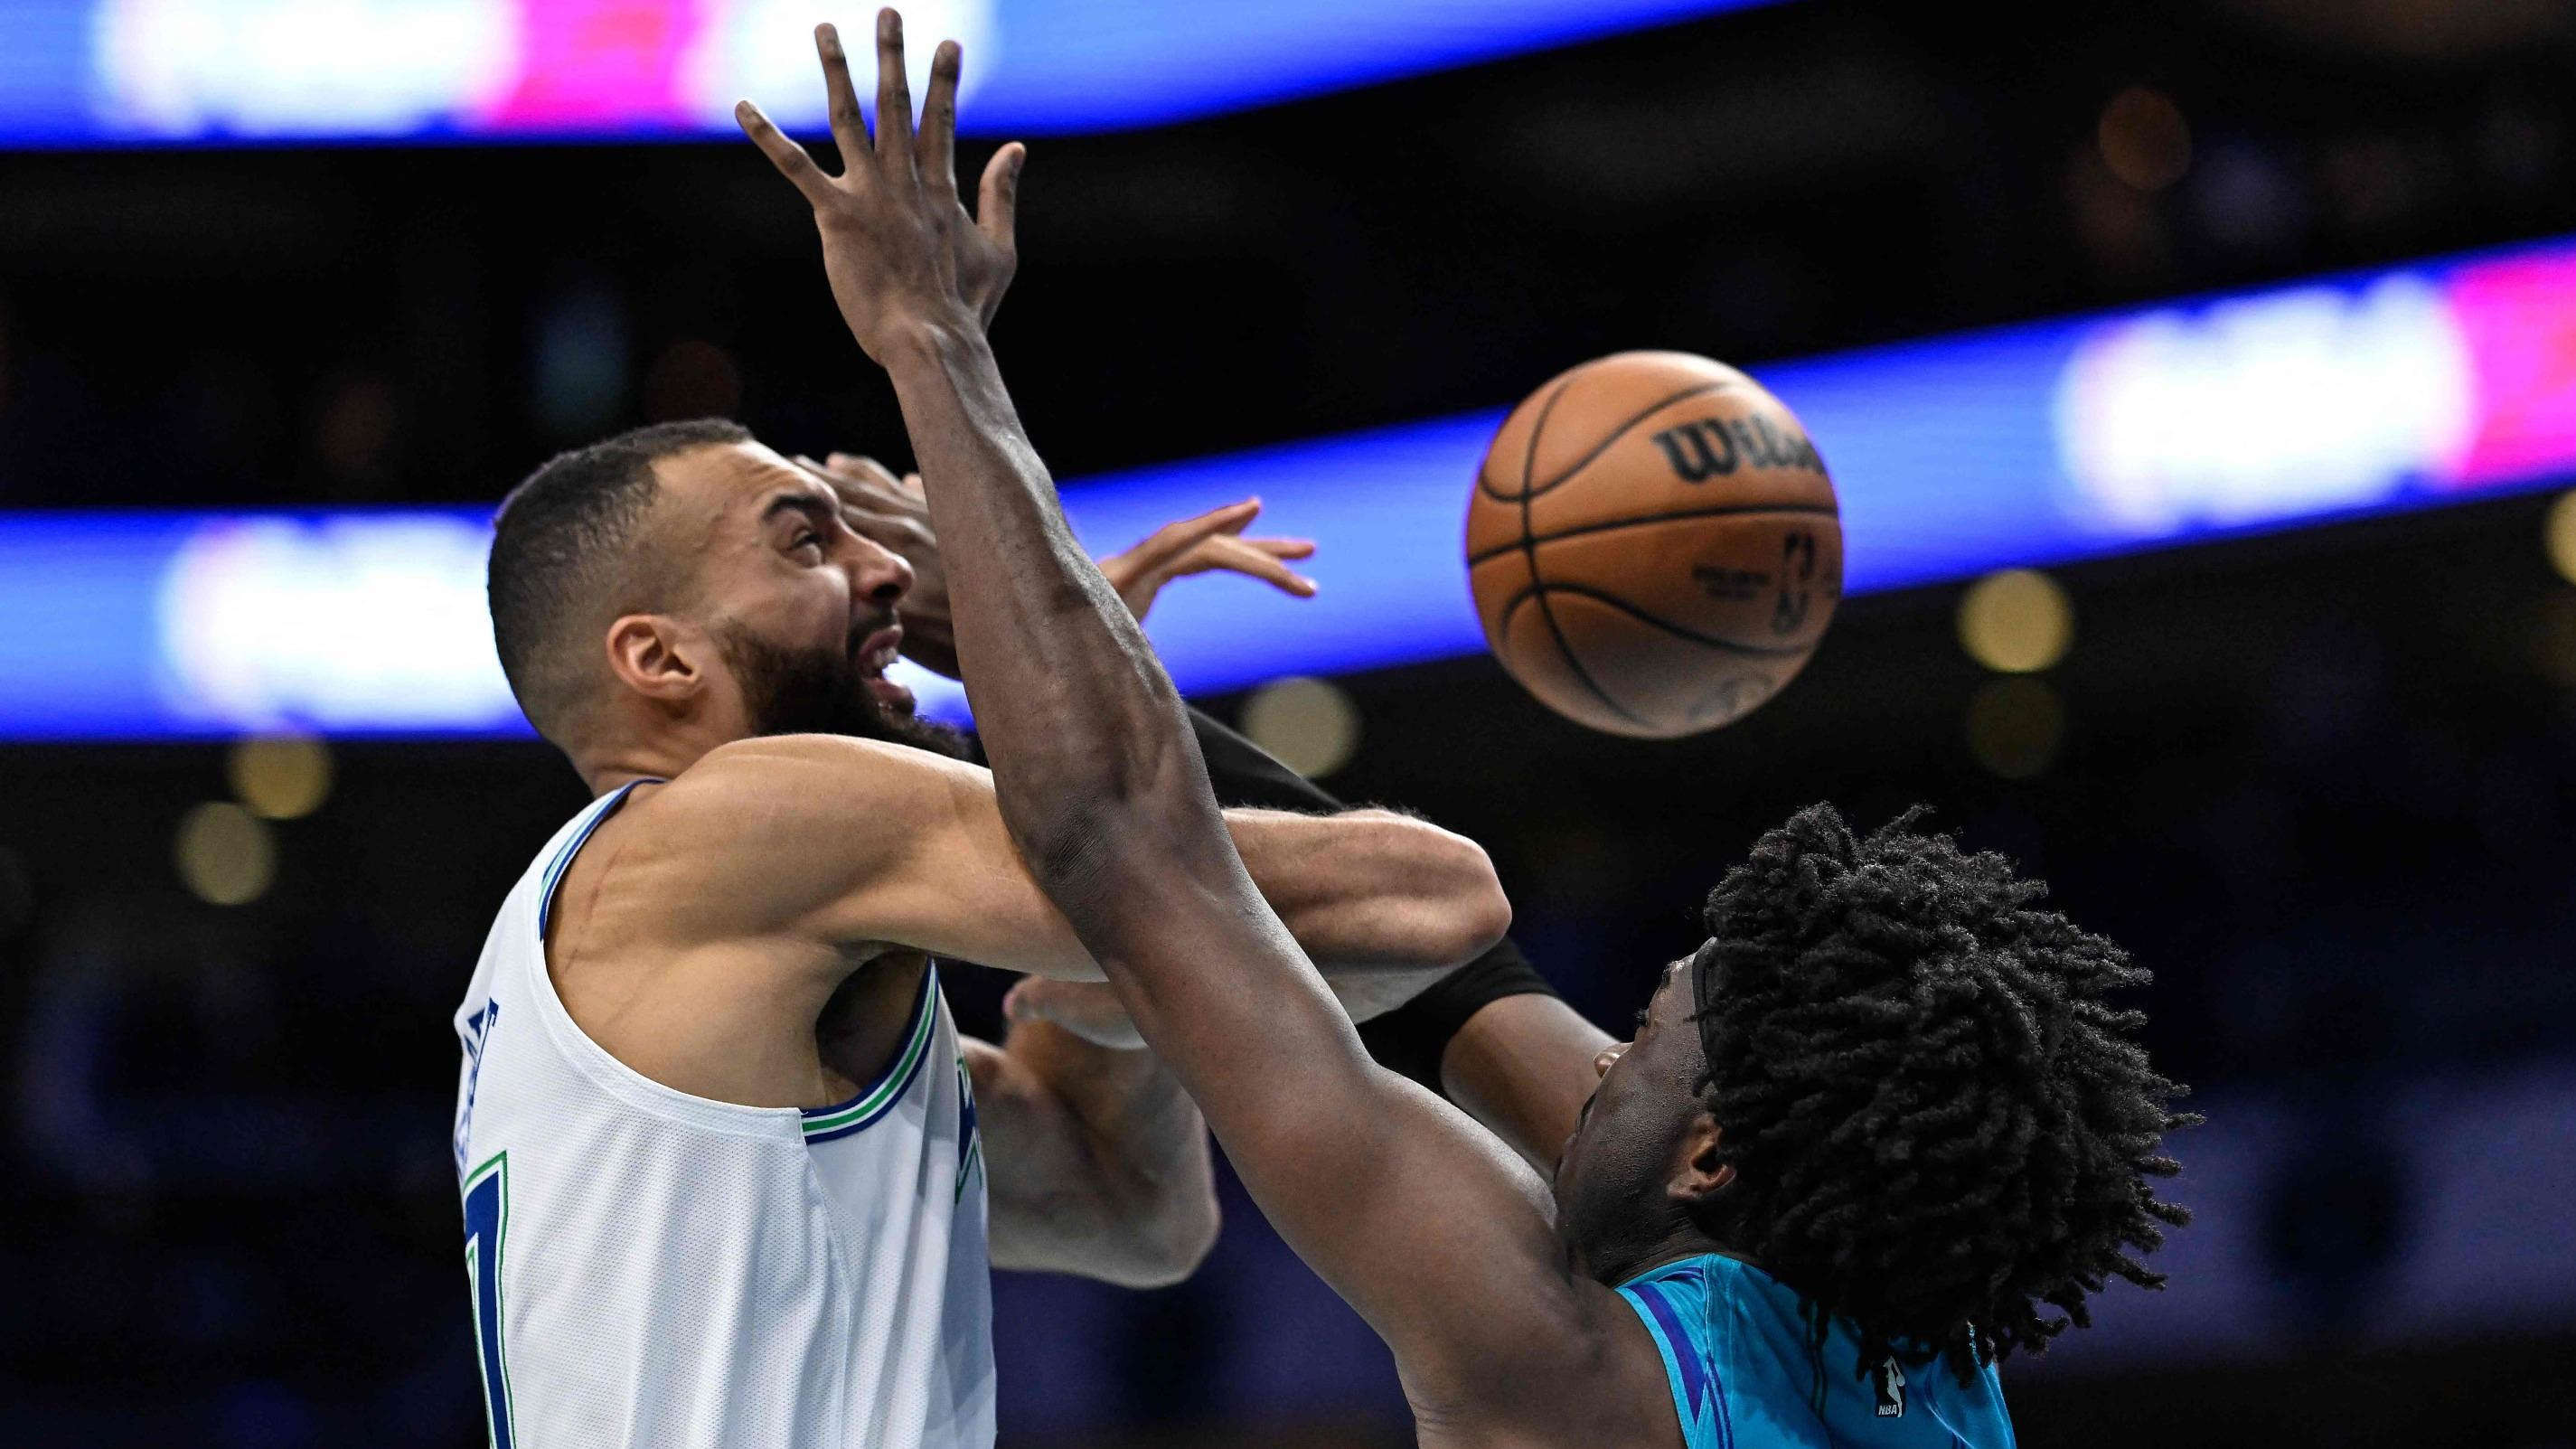 NBA: Gobert in great form, triple-double for Doncic and Jokic